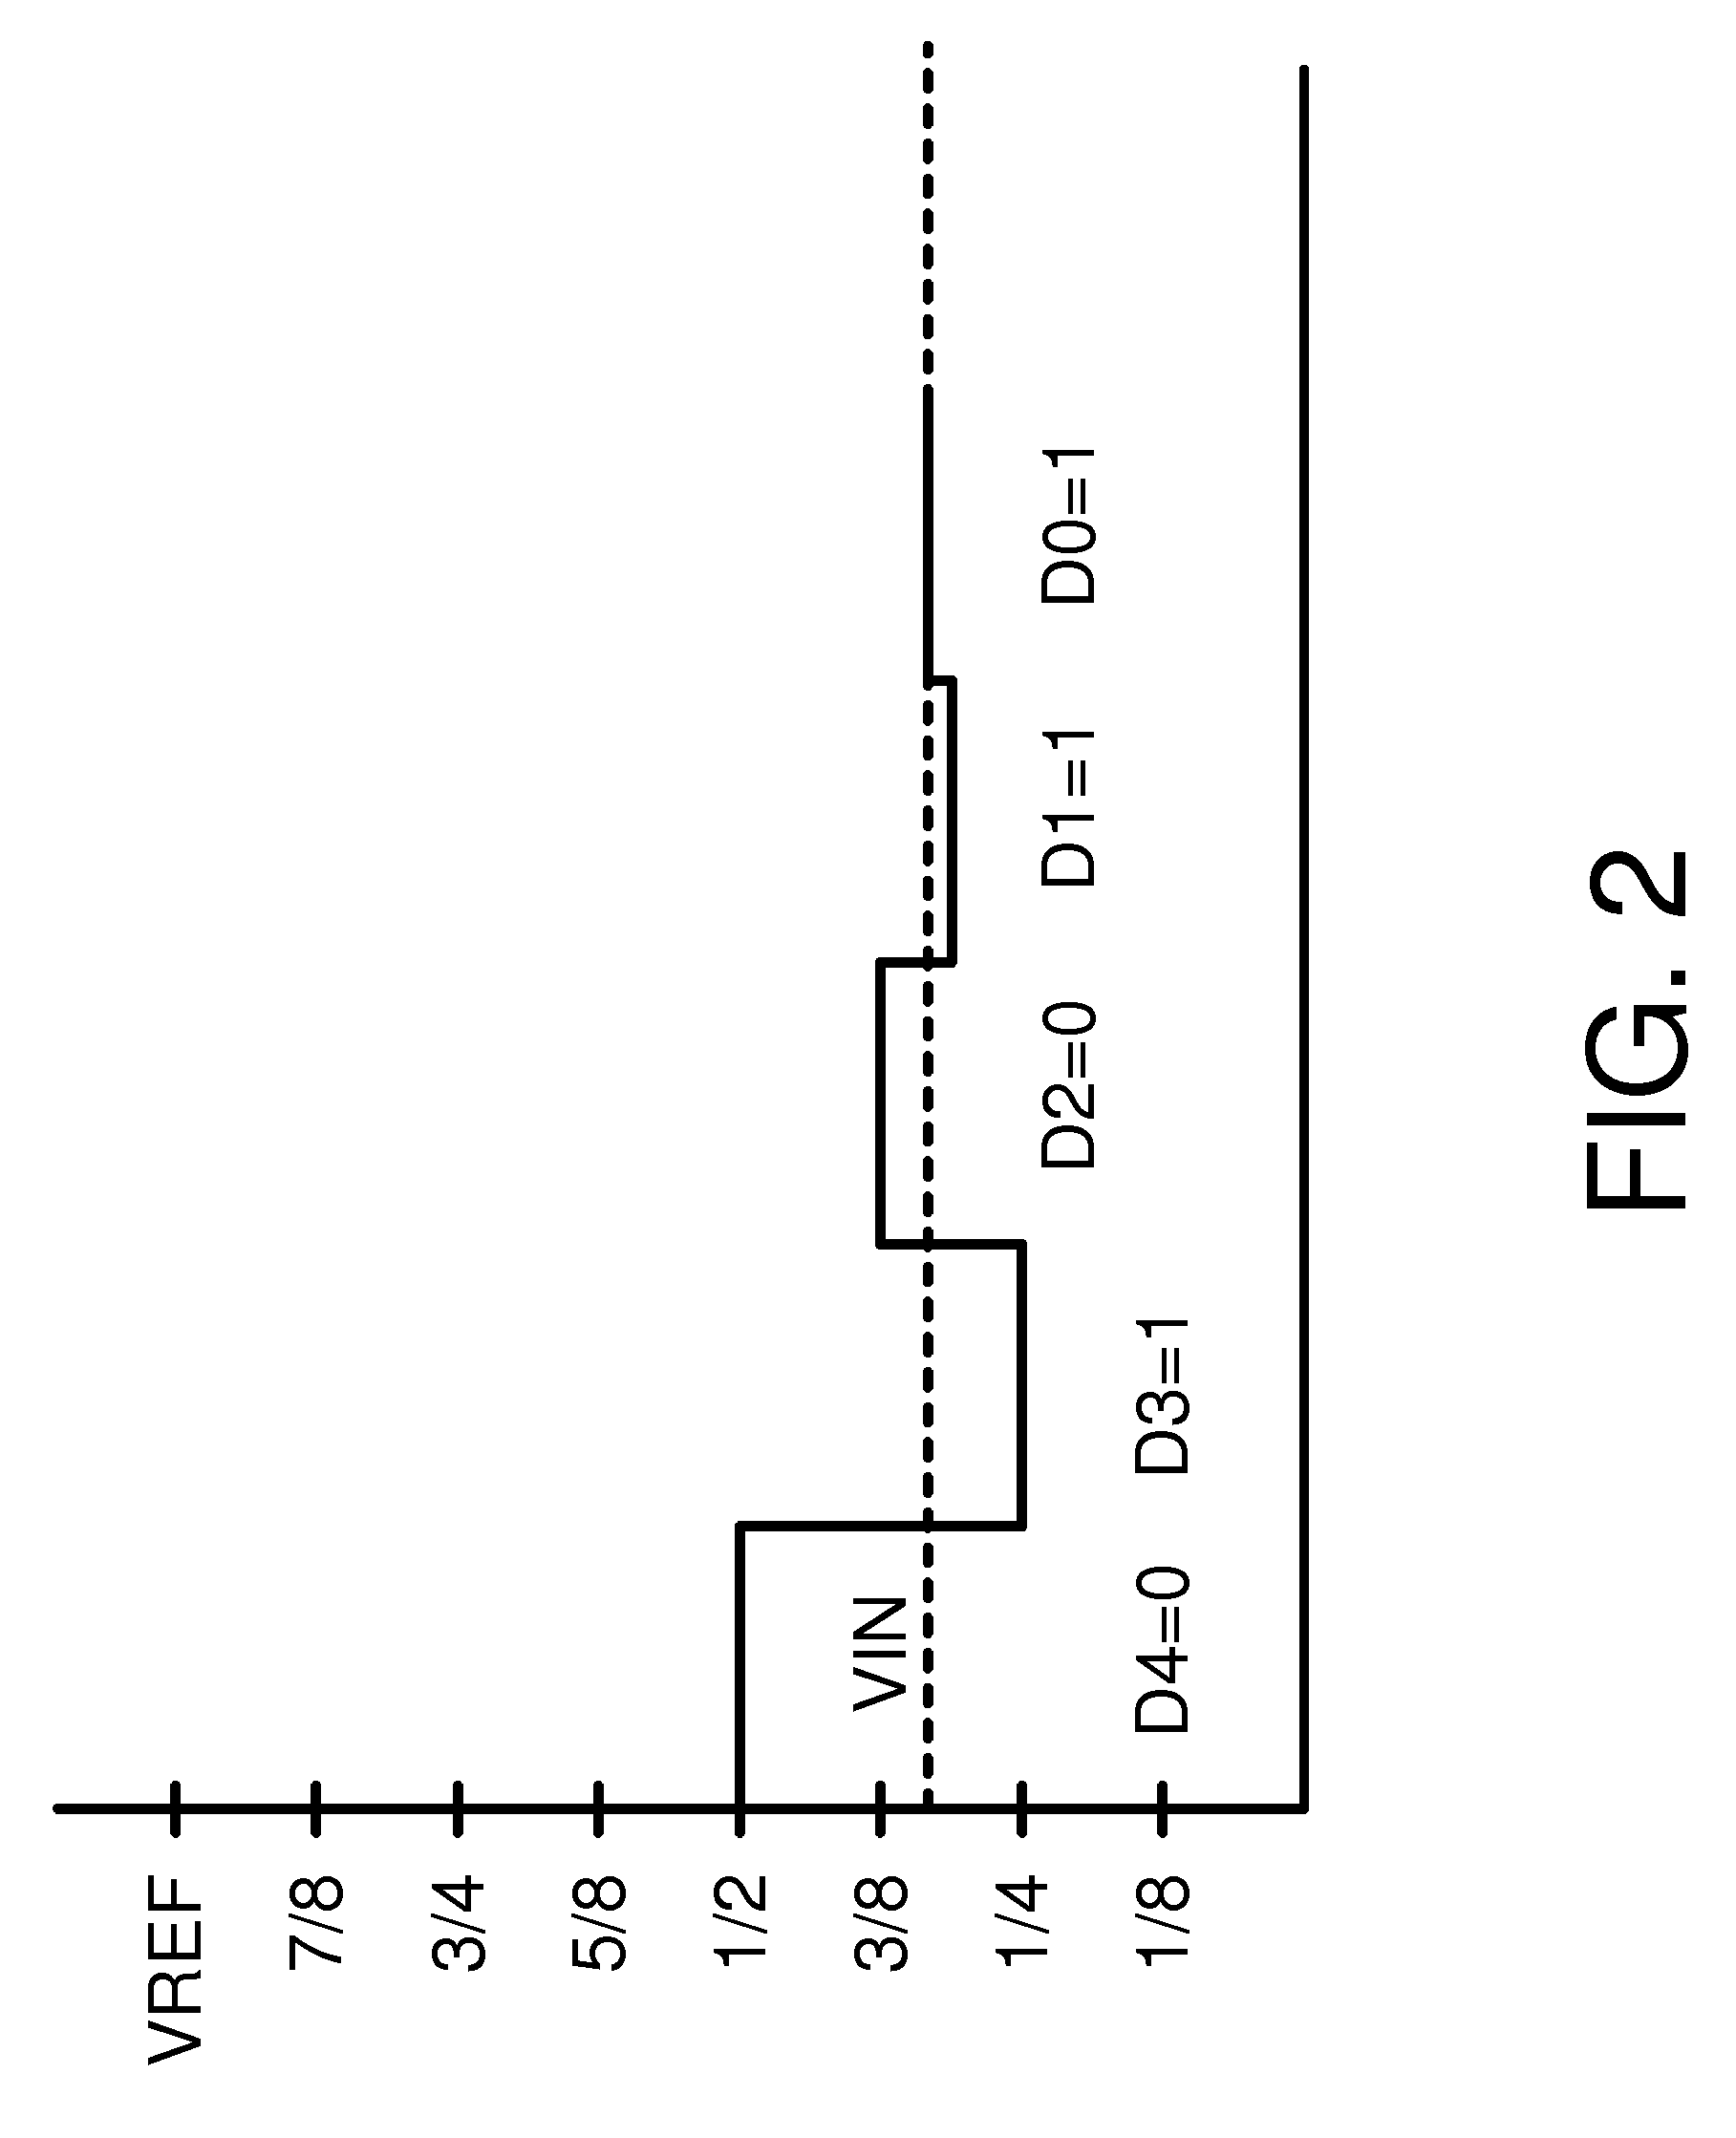 Charge compensation calibration for high resolution data converter